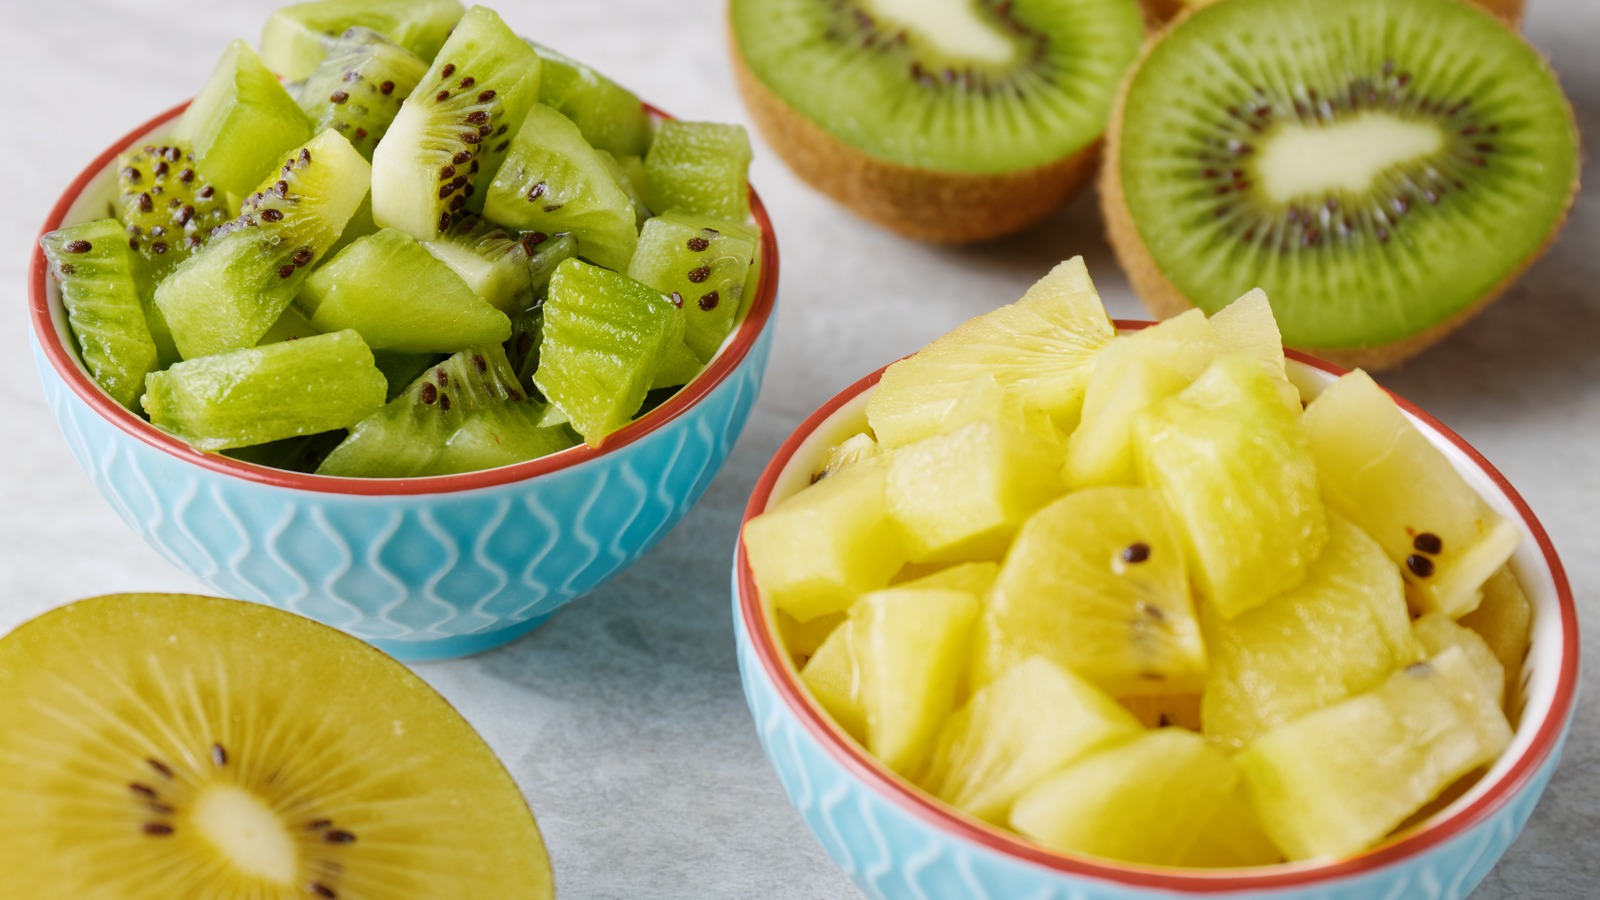 Daily dose of Healthy � - Green or Yellow Kiwi? ___ They both deliver about  the same amount of energy (45 kcal per medium kiwi). The only differences  are they vitamin C